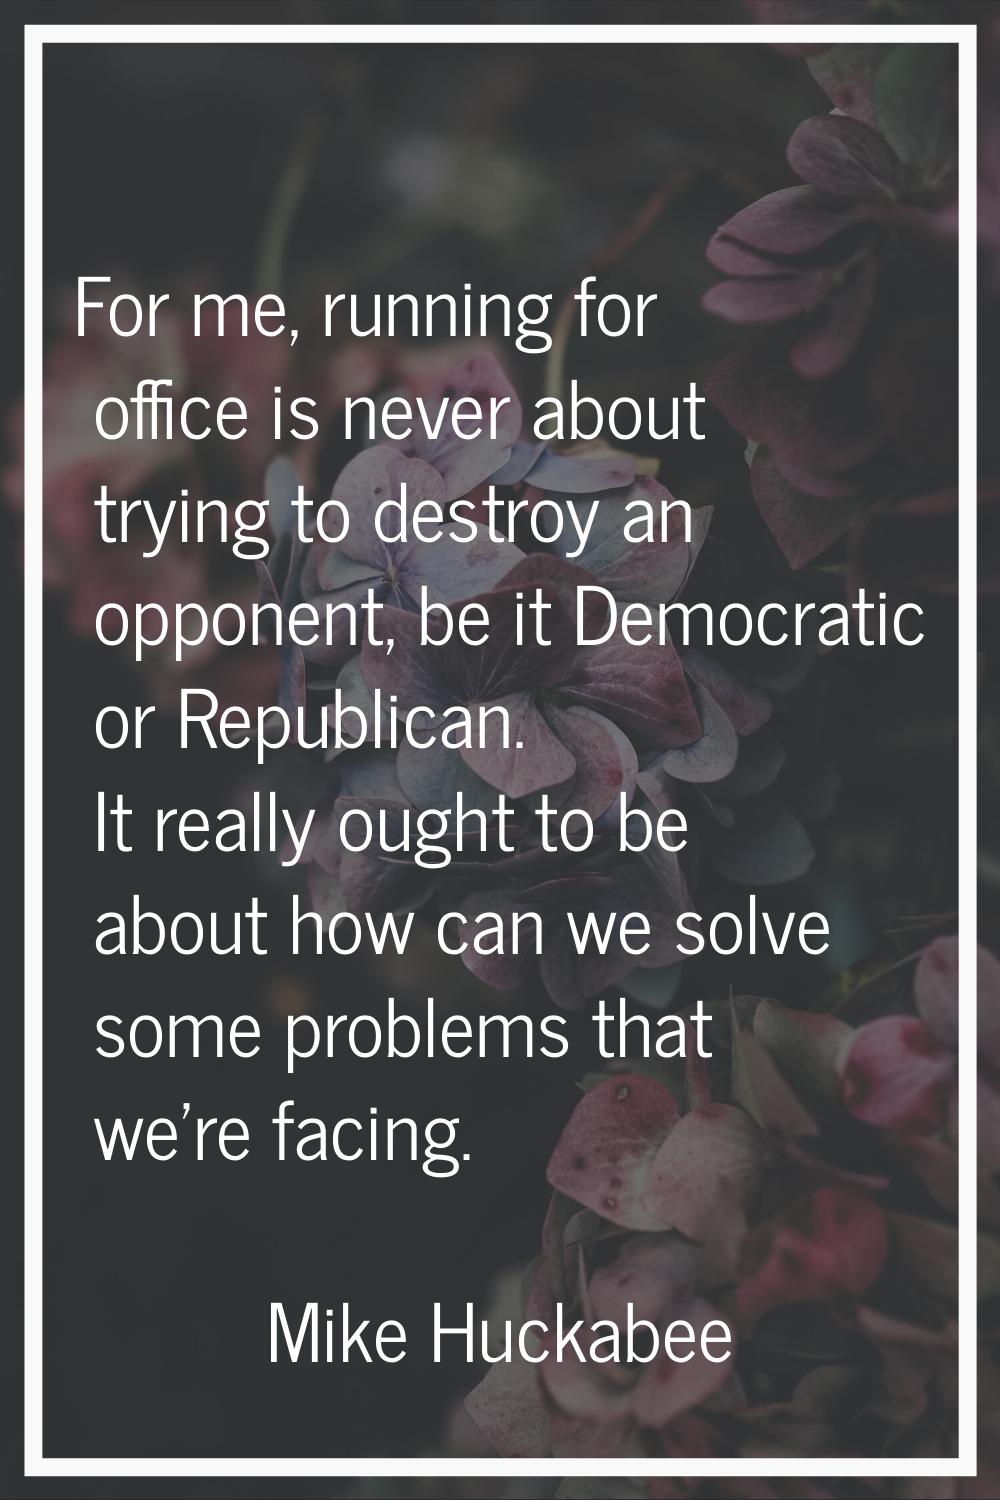 For me, running for office is never about trying to destroy an opponent, be it Democratic or Republ